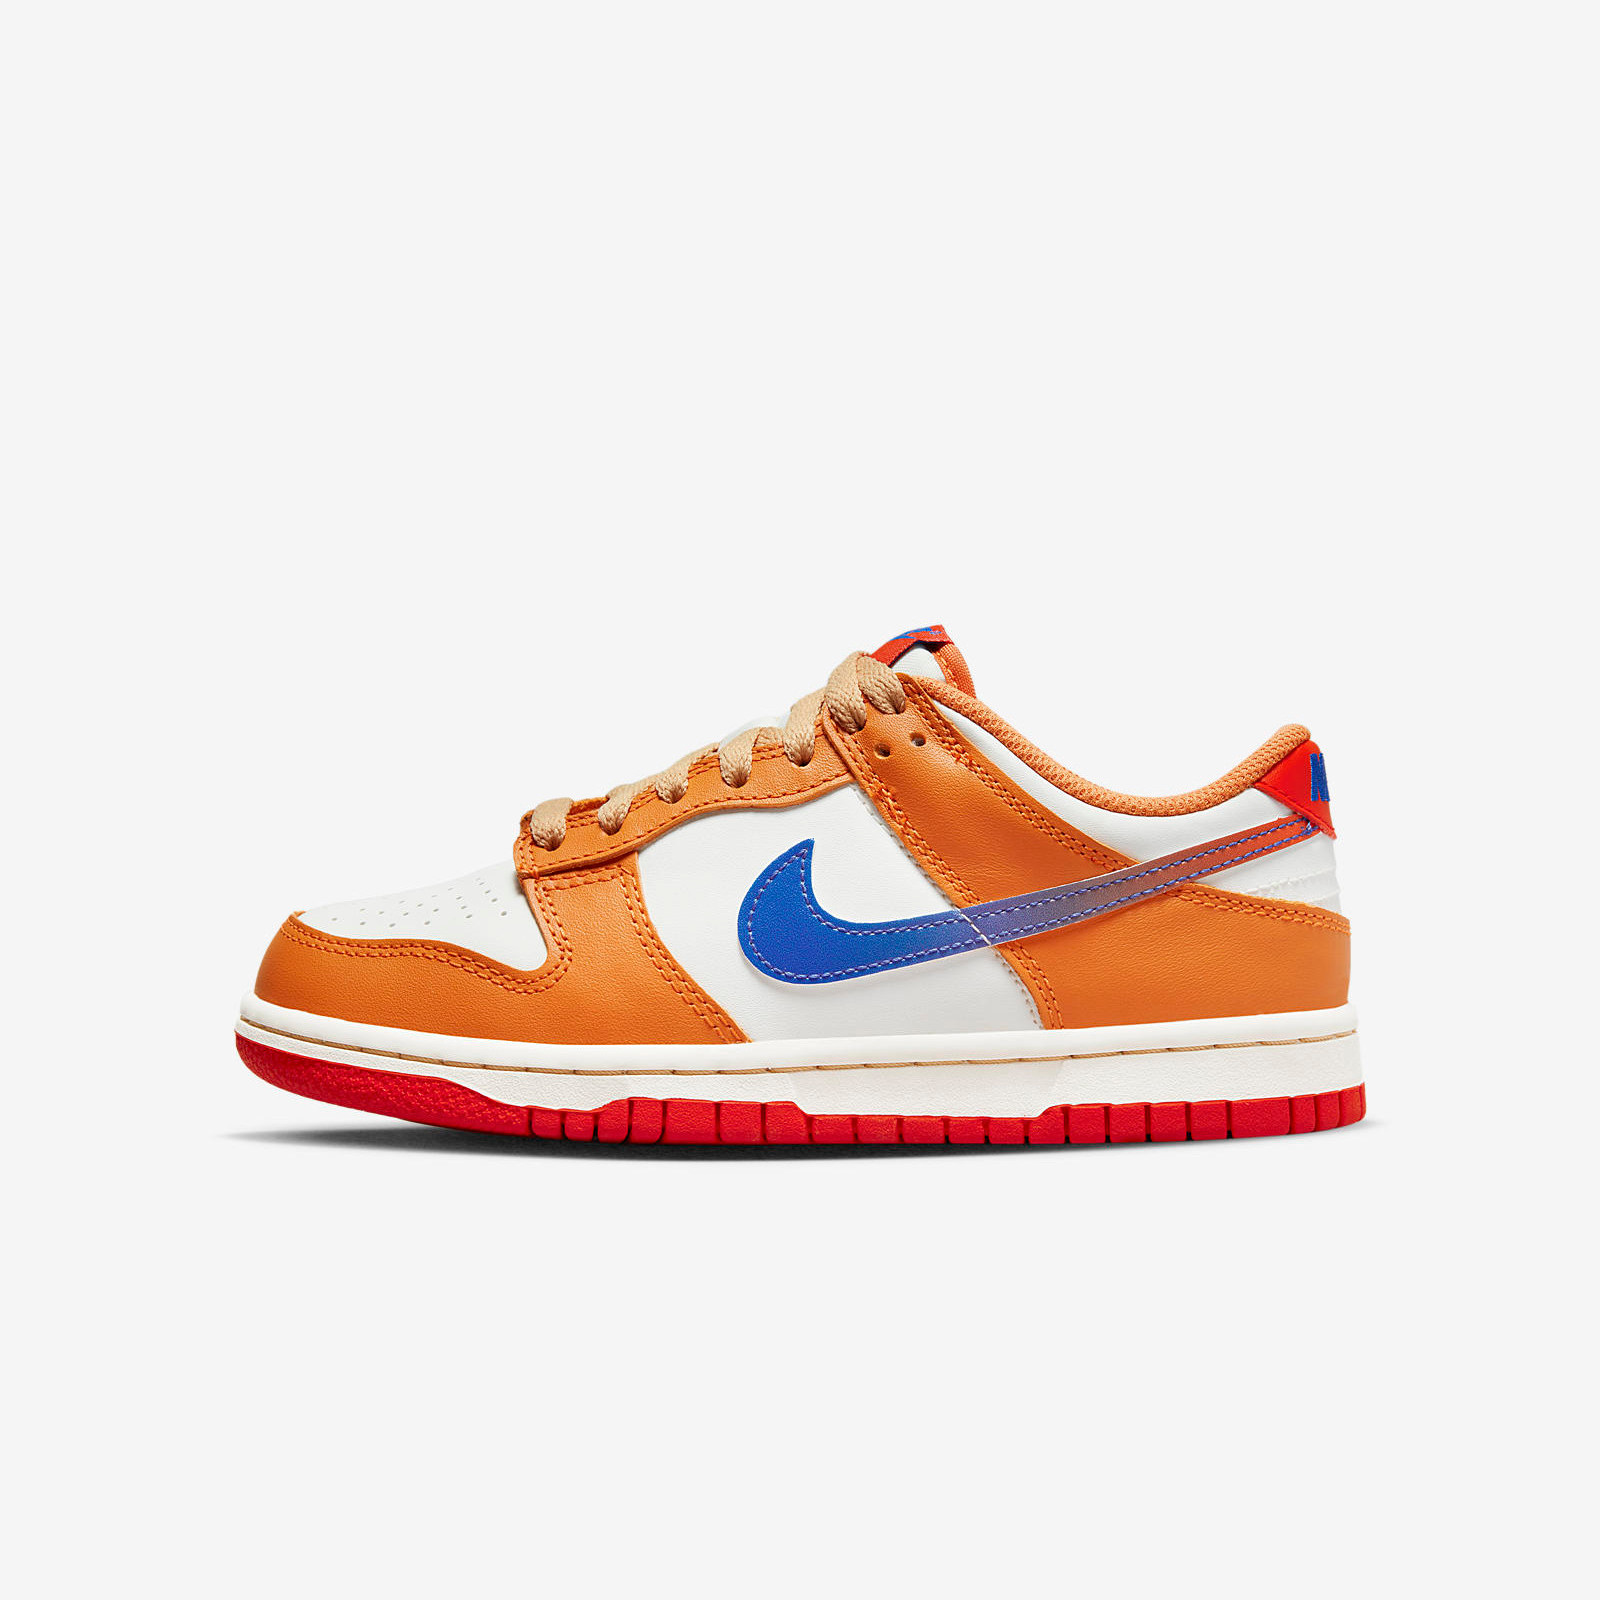 Nike Dunk Low
« Hot Curry »